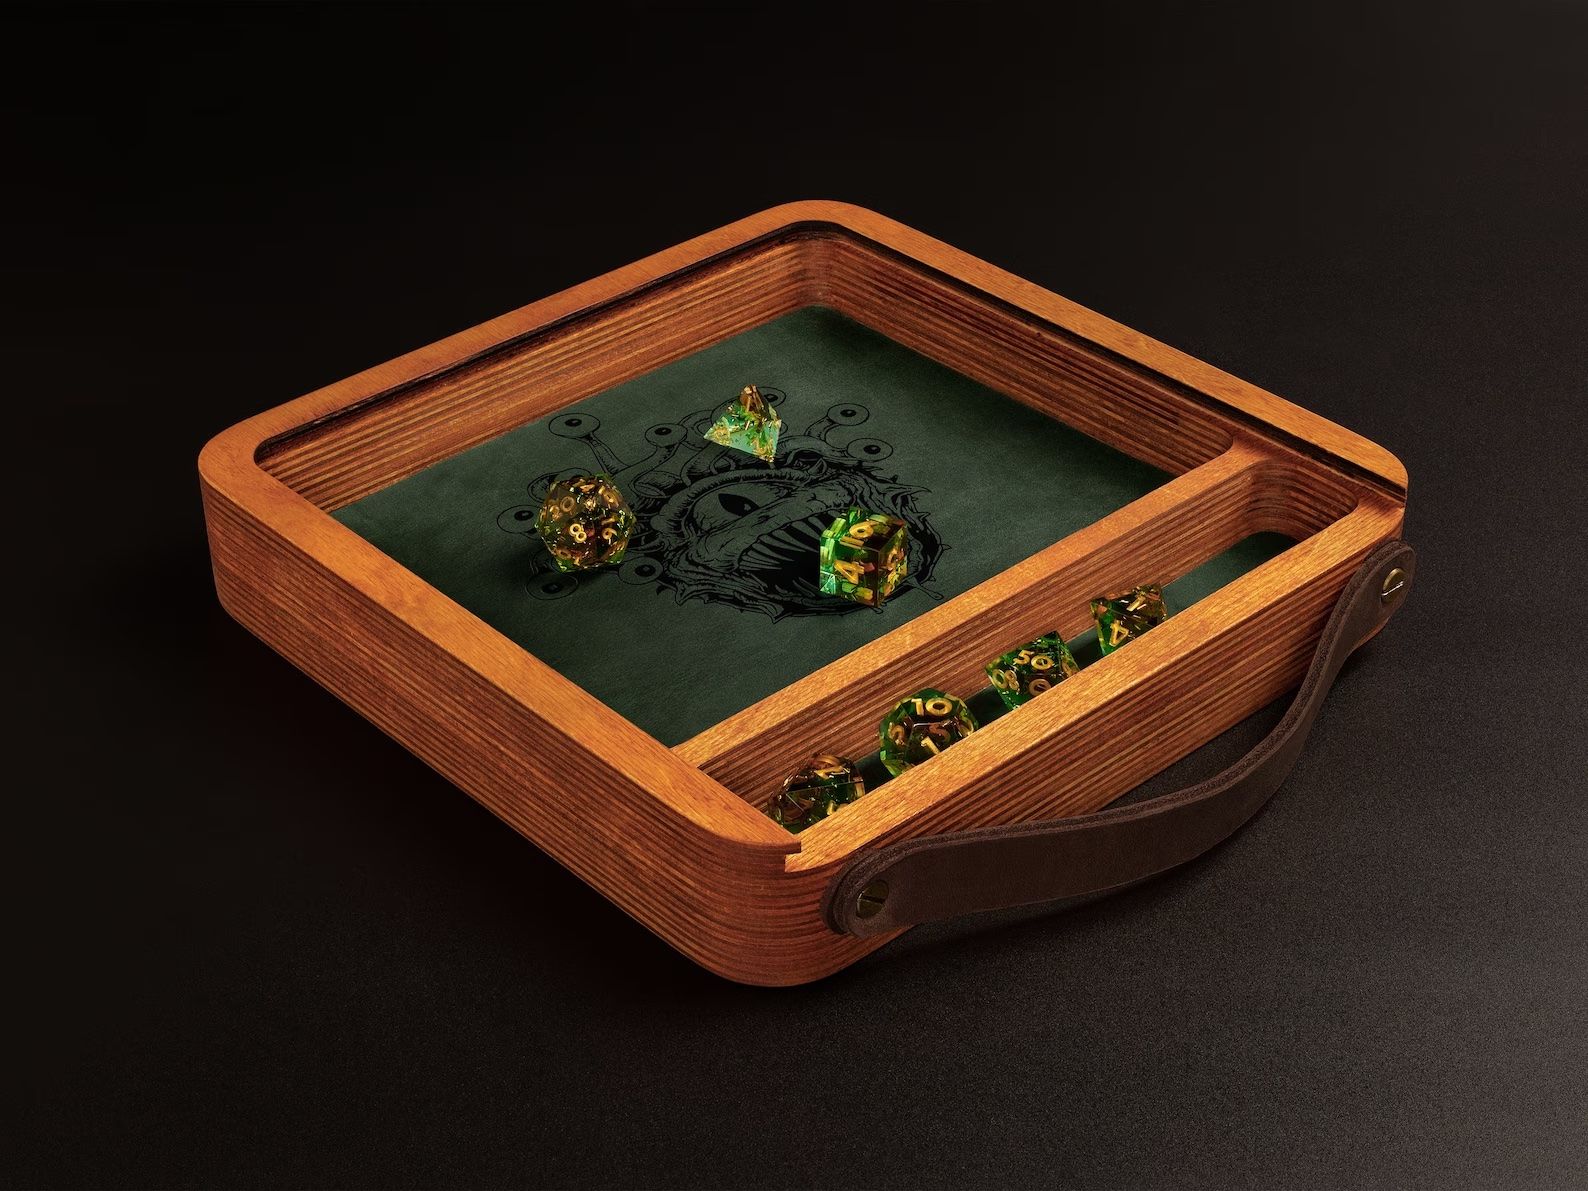 Wooden dice rolling tray and carrying case with dice inside.